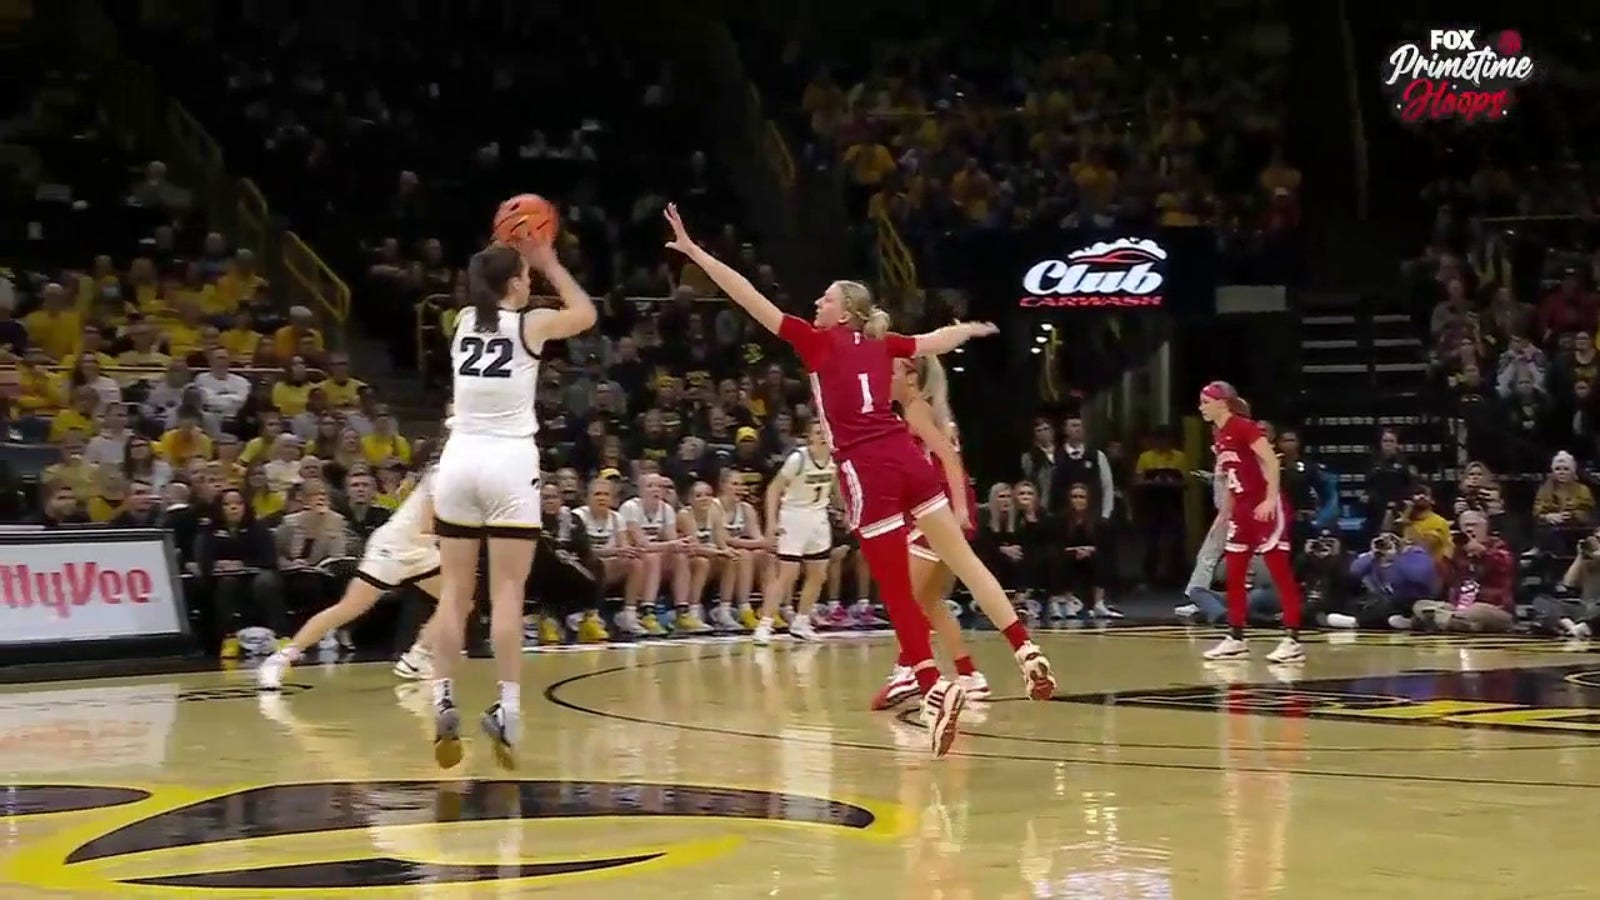 Caitlin Clark splashes a 3-pointer from the LOGO as Iowa extends lead over Indiana 